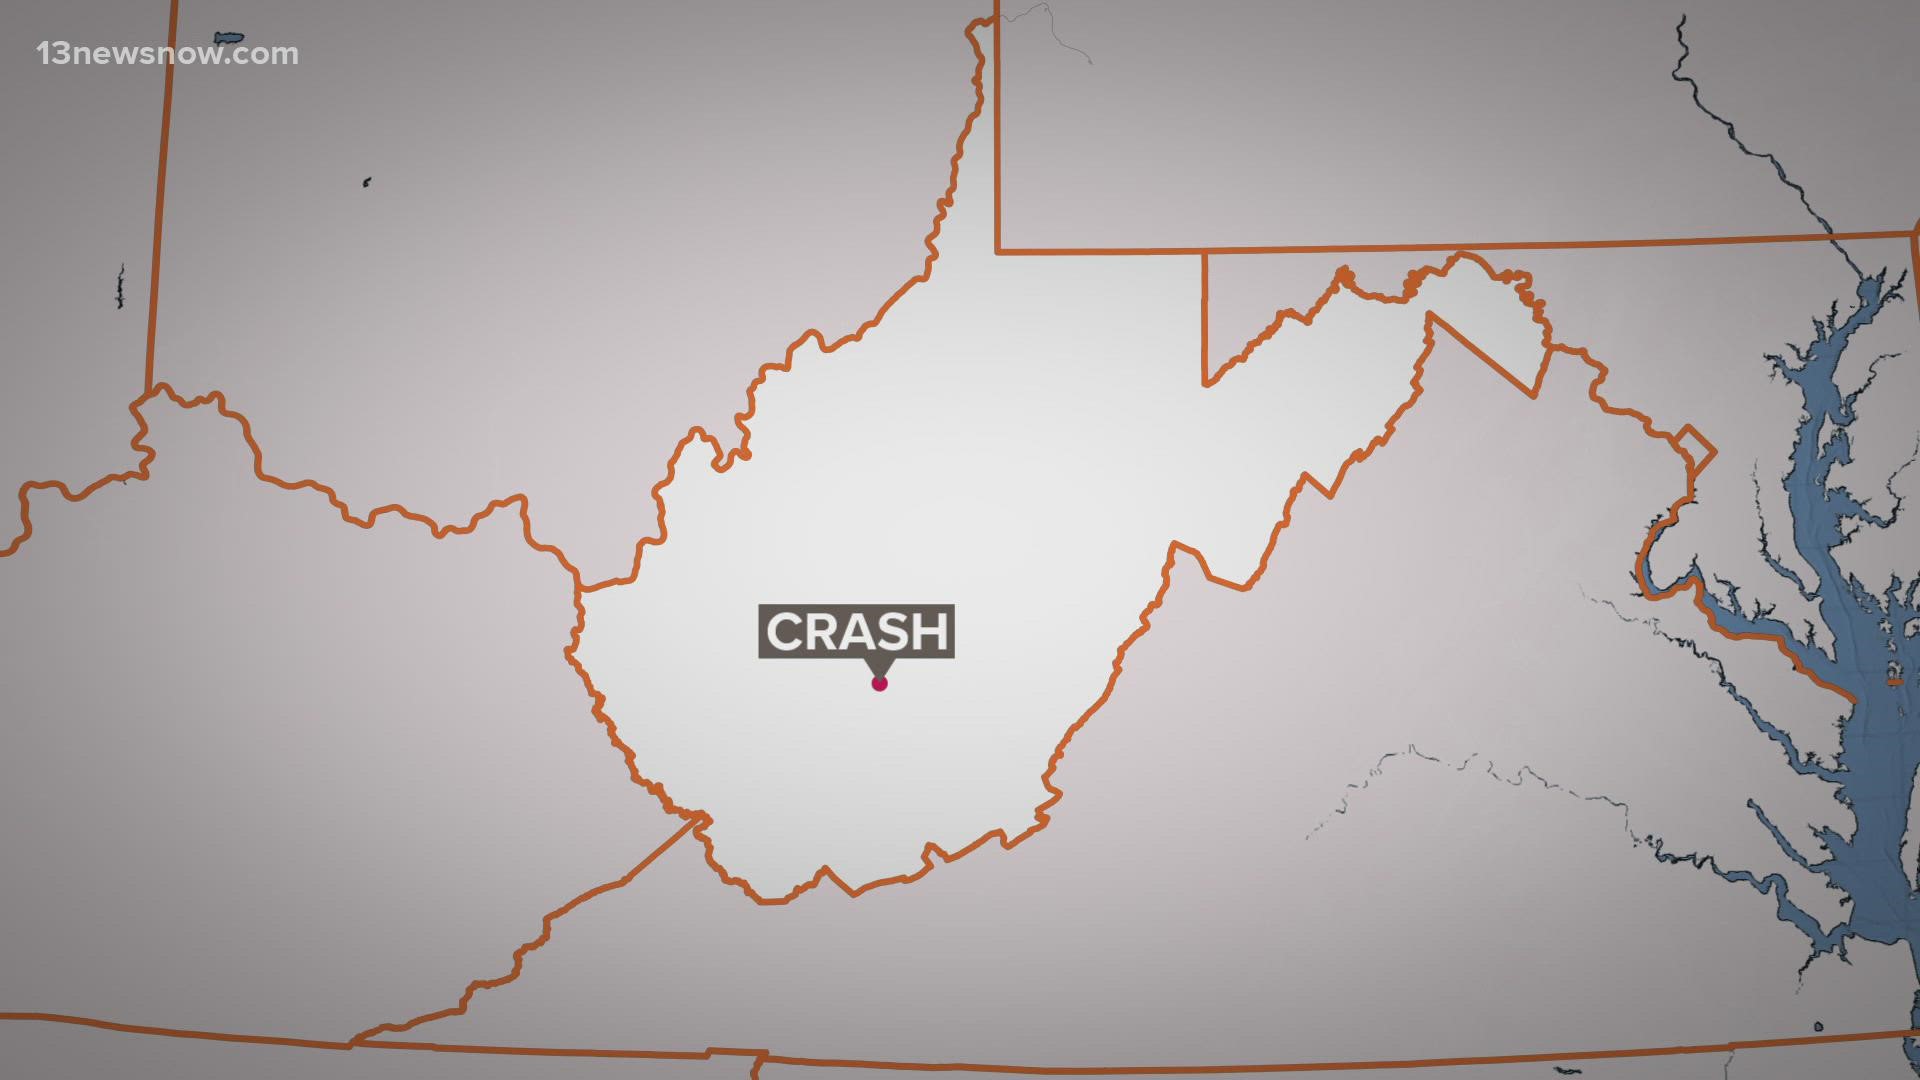 West Virginia State Police said Nick Fletcher, 38, Michael Taphouse, 36, and Wesley Farley, 39, died when a Beech C23 crashed near the Lansing area on Sunday.